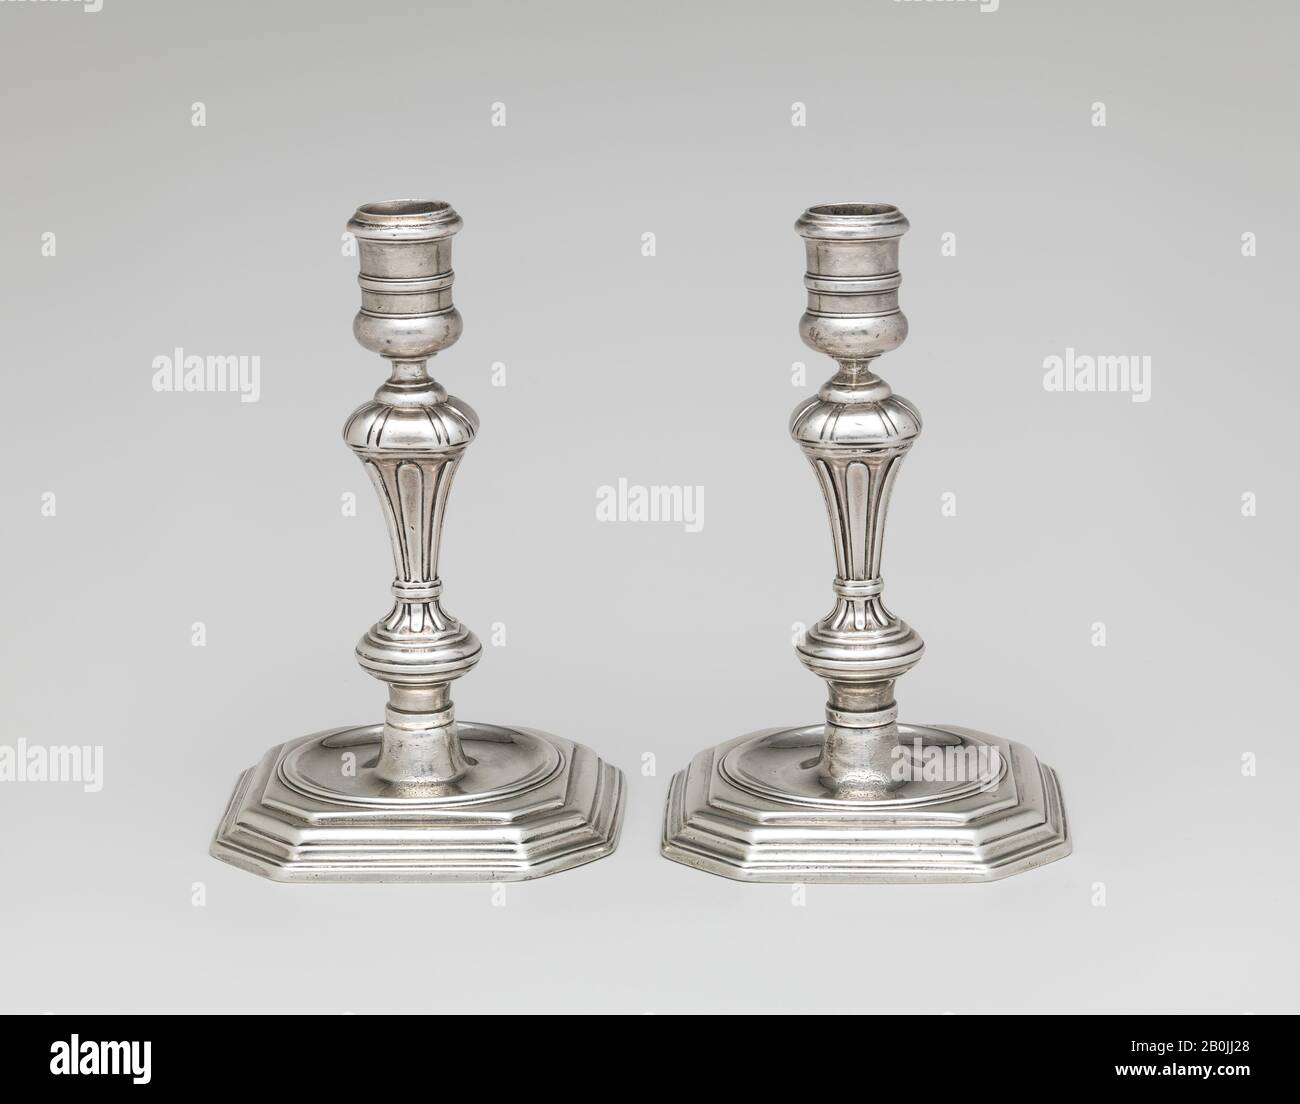 David Willaume I, Pair of candlesticks, British, London, David Willaume I (British, 1658–1741), 1710/11, British, London, Silver, Overall (.142, confirmed): 6 1/8 x 3 7/8 x 3 7/8 in., 11 oz. 18 dwt. (15.6 x 9.8 x 9.8 cm, 0.3705kg), Overall (.143, confirmed): 6 x 3 7/8 x 3 7/8 in., 11 oz. 11 dwt. (15.2 x 9.8 x 9.8 cm, 0.359kg), Metalwork-Silver Stock Photo